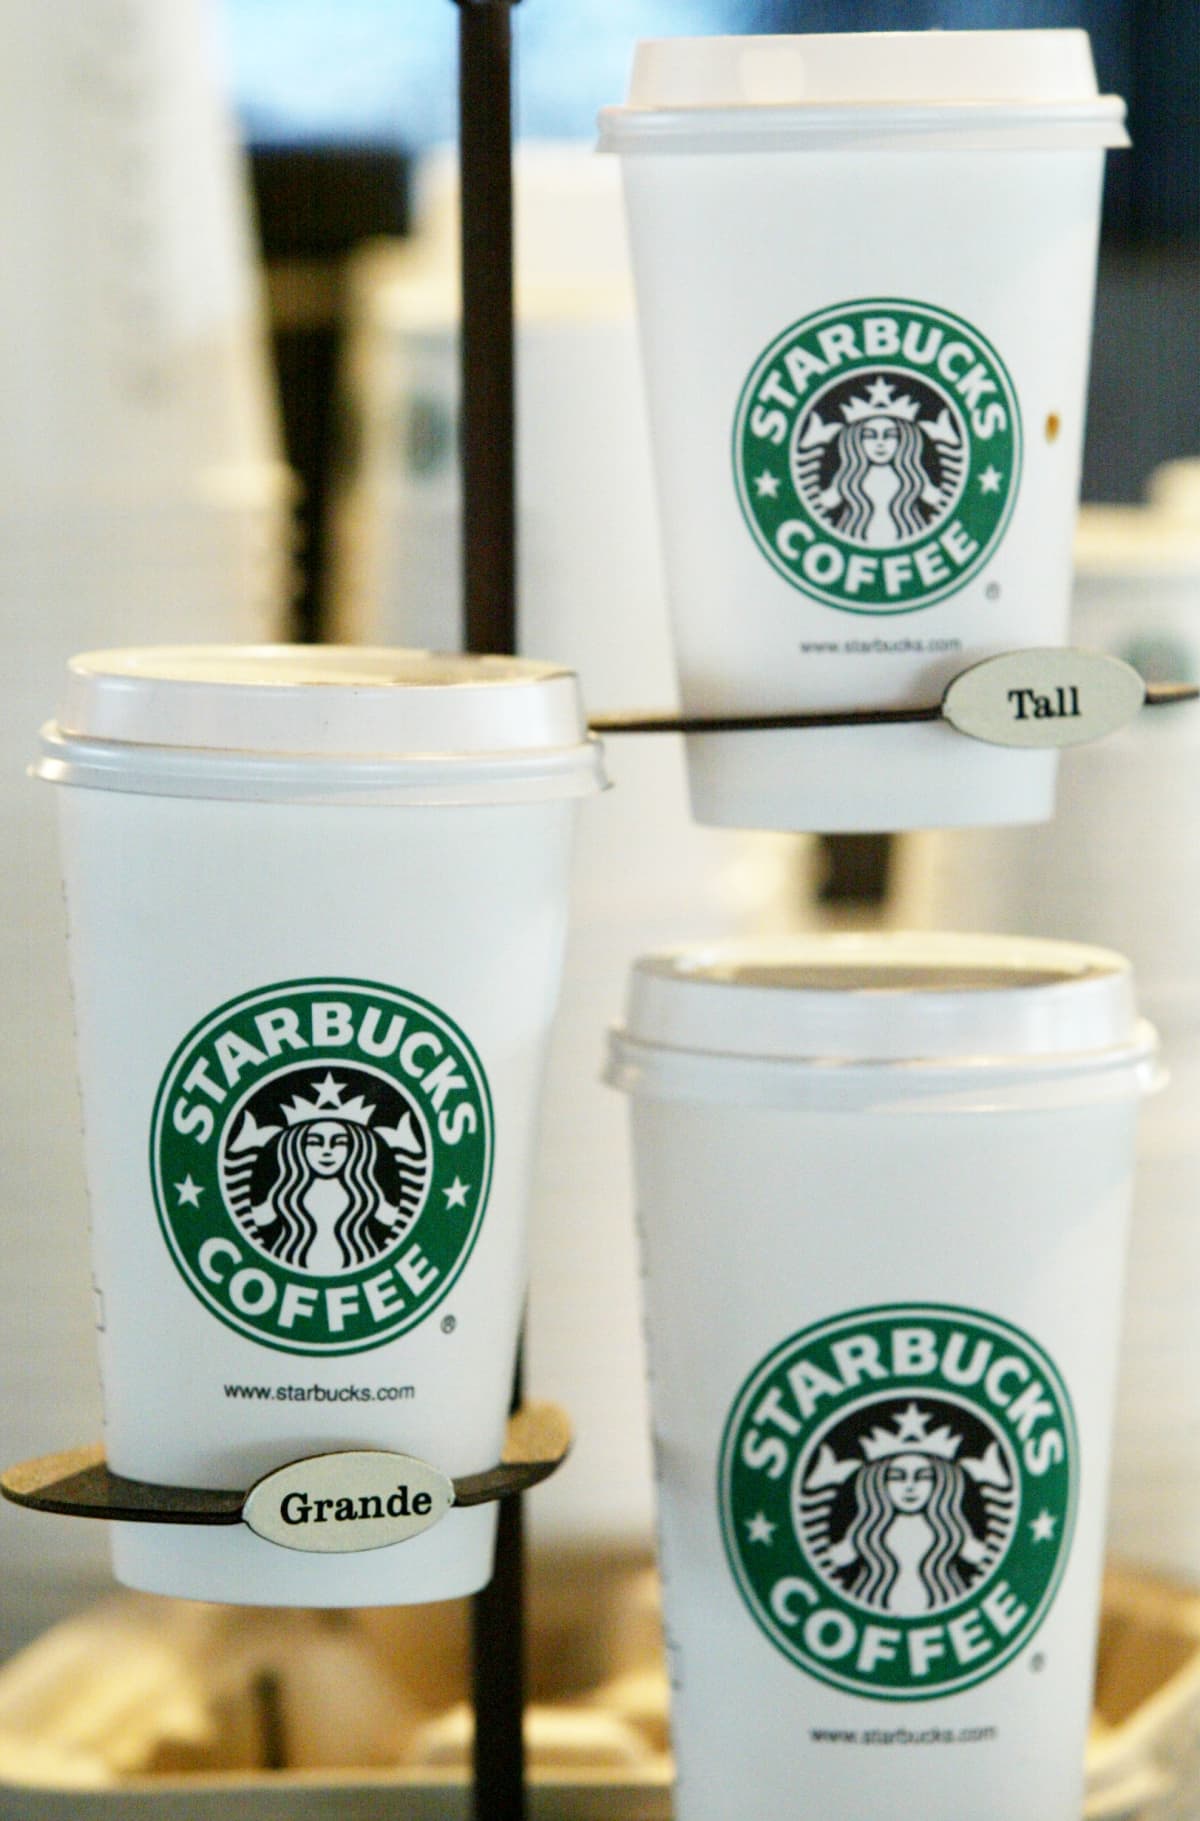 Different sizes of Starbucks drink cups on display